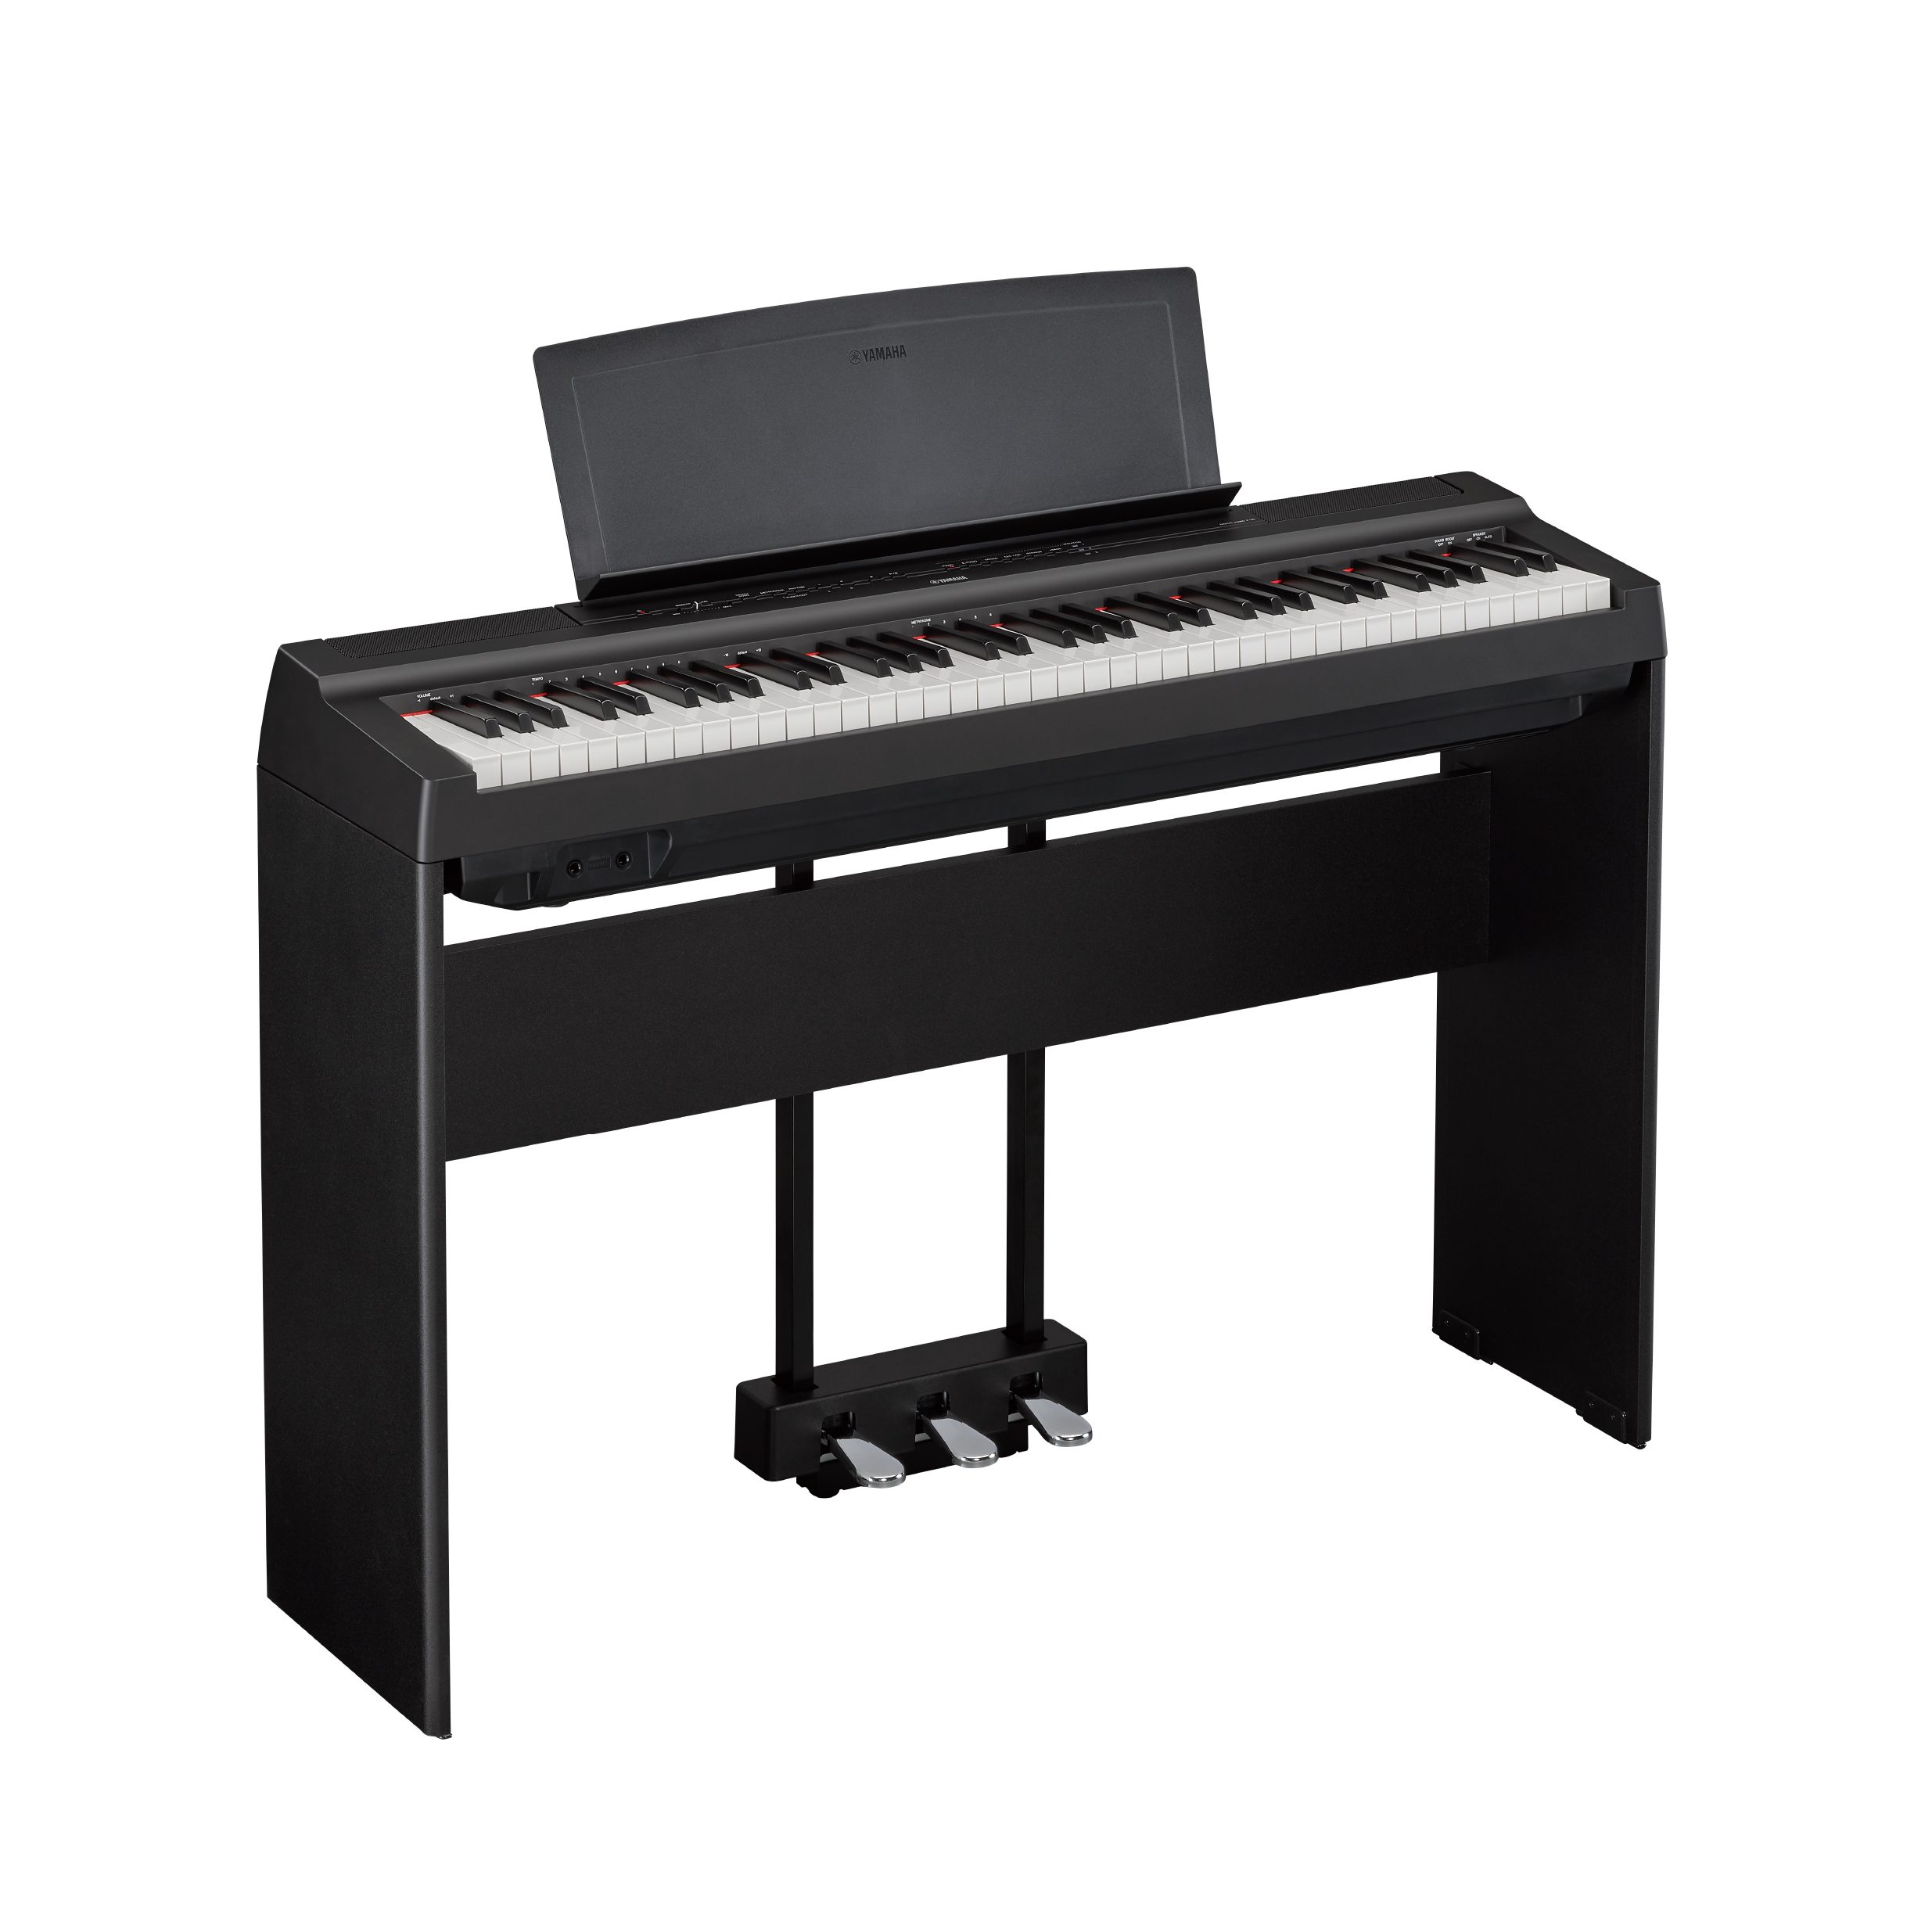 P-121 - Overview - P Series - Pianos - Musical Instruments